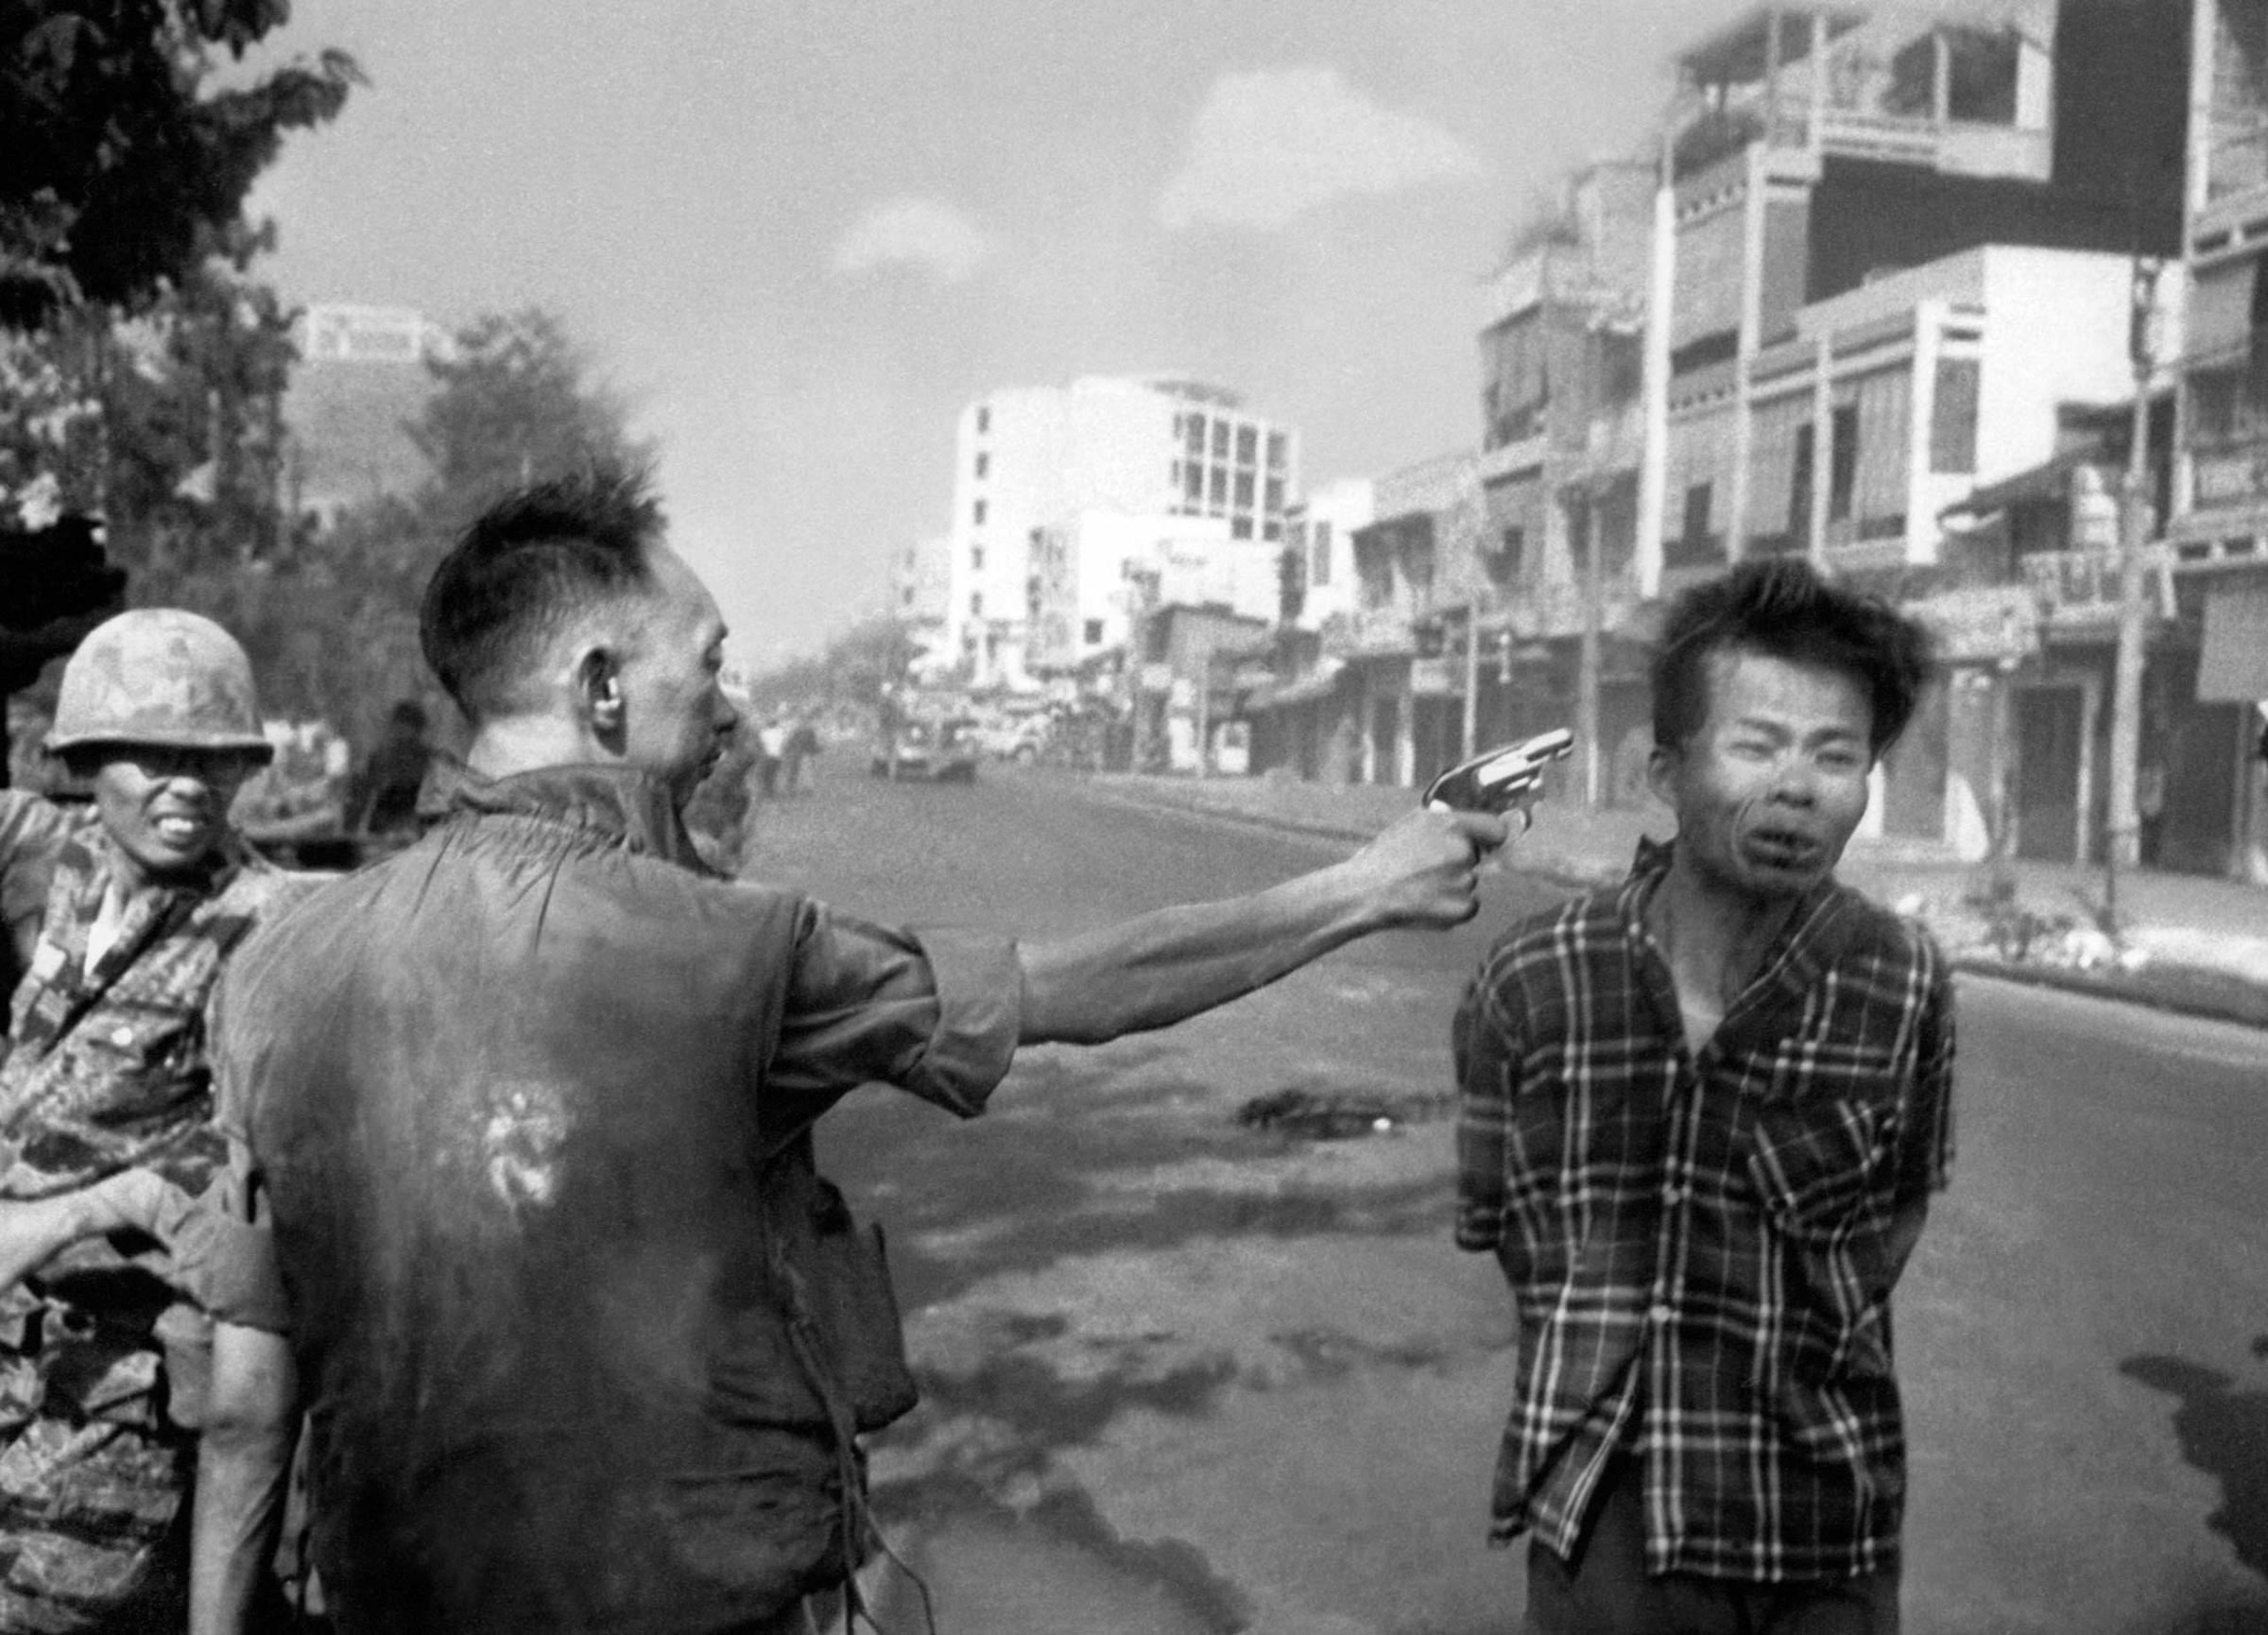 South Vietnamese General Nguyen Ngoc Loan, chief of the National Police, fires his pistol into the head of suspected Viet Cong officer Nguyen Van Lem (also known as Bay Lop) on a Saigon street on Feb. 1, 1968.